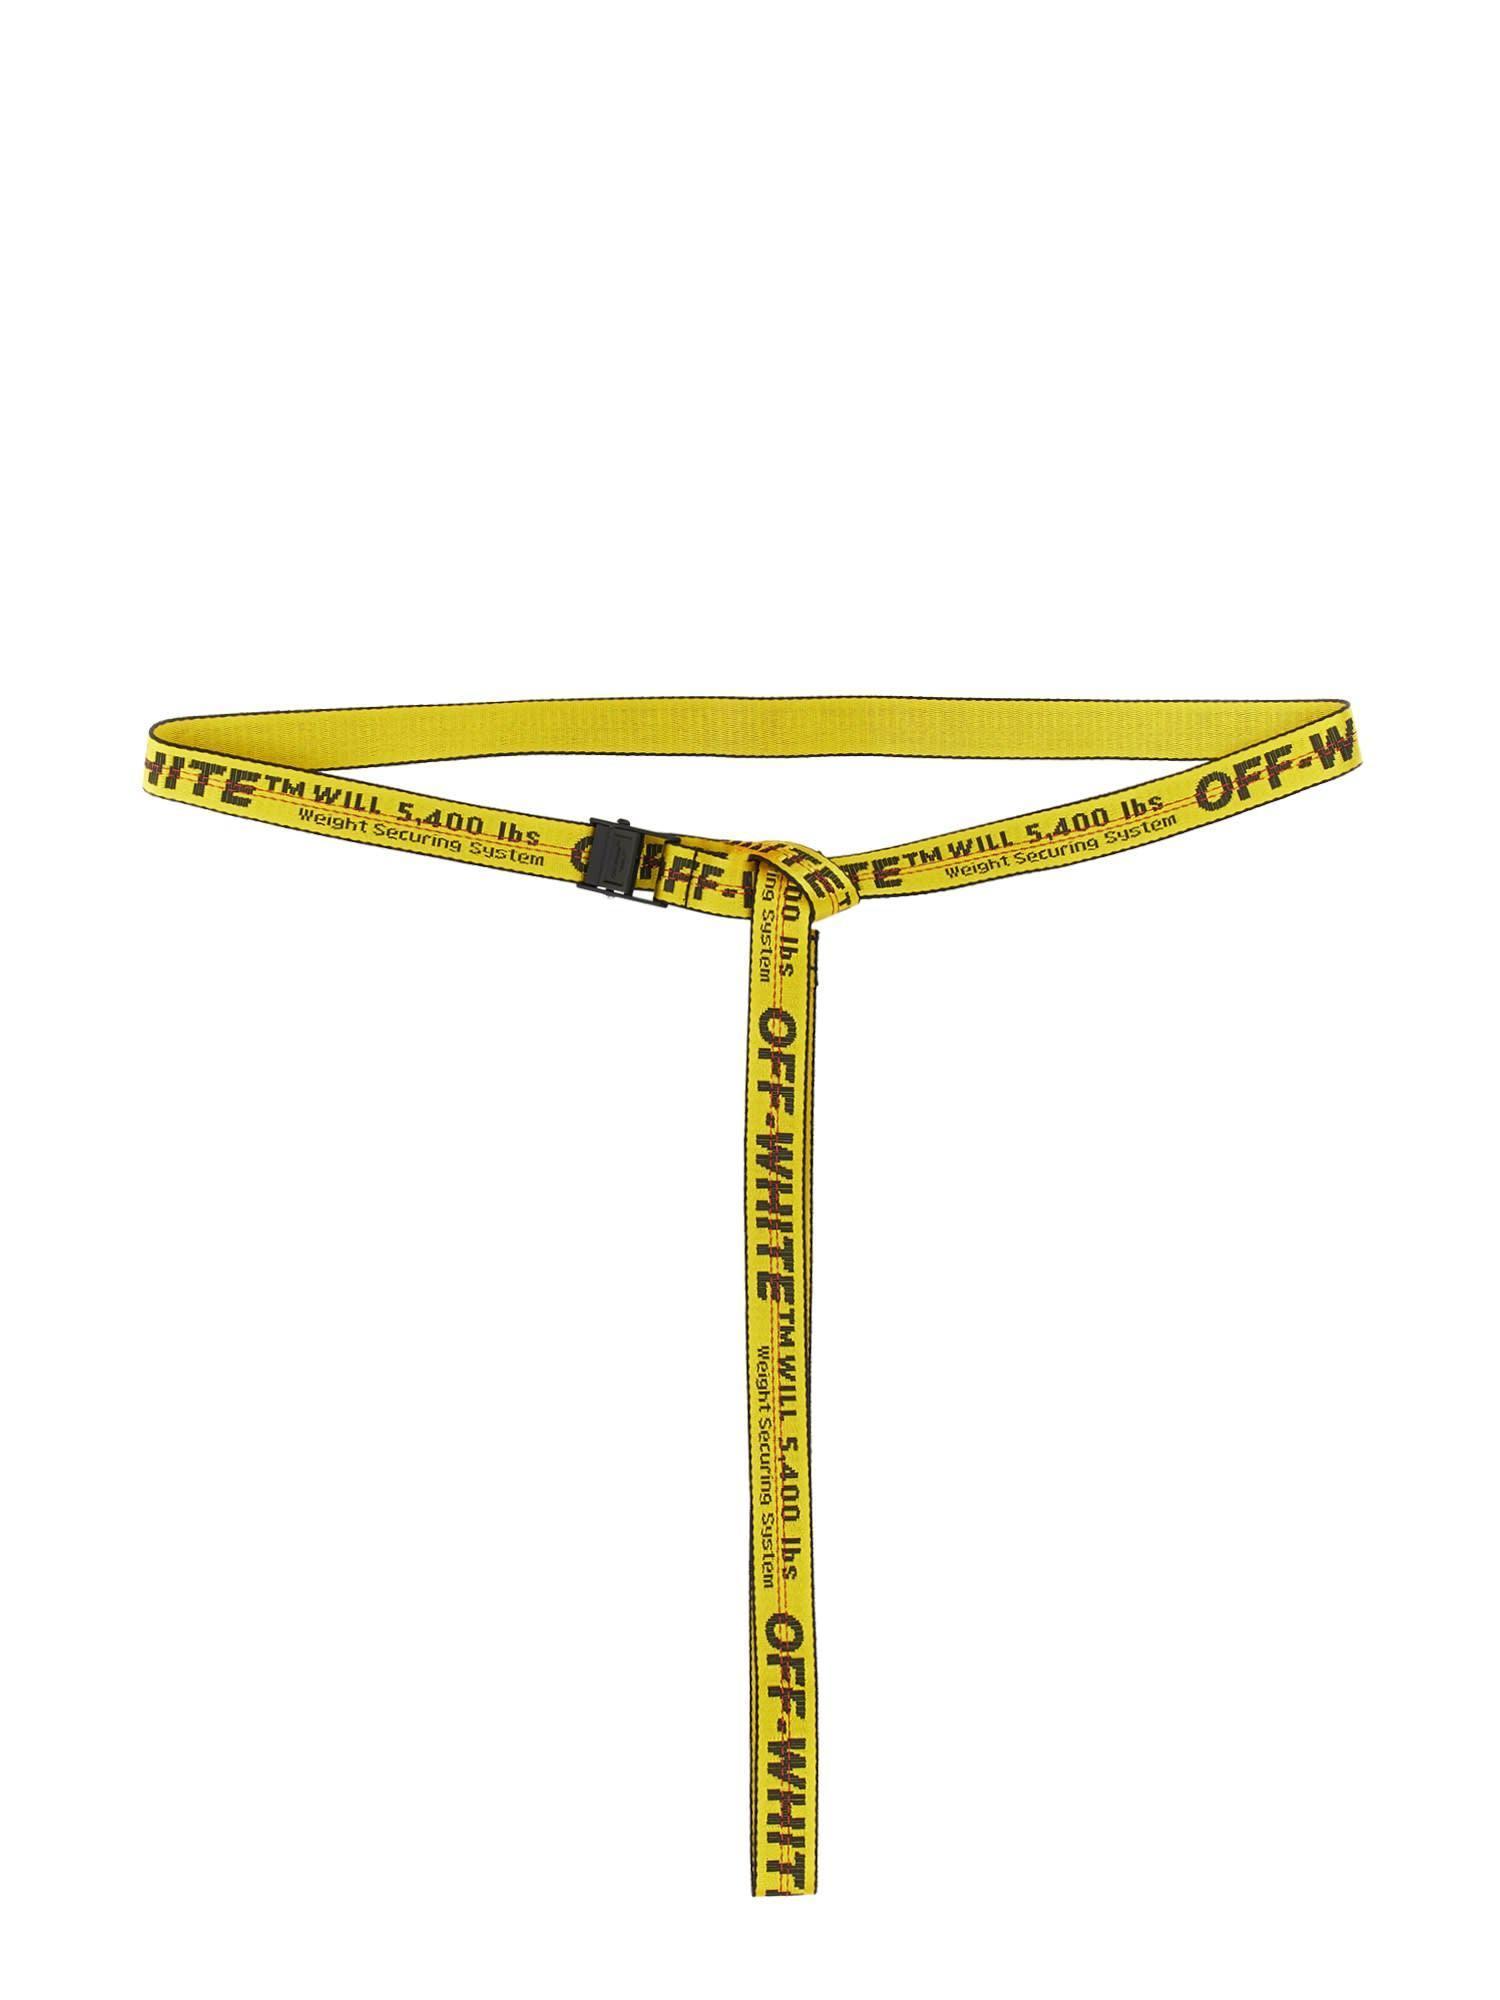 VIRGIL ABLOH OFF WHITE Industrial Belt YELLOW & BLACK BRAND NEW WITH  TAGS 80"